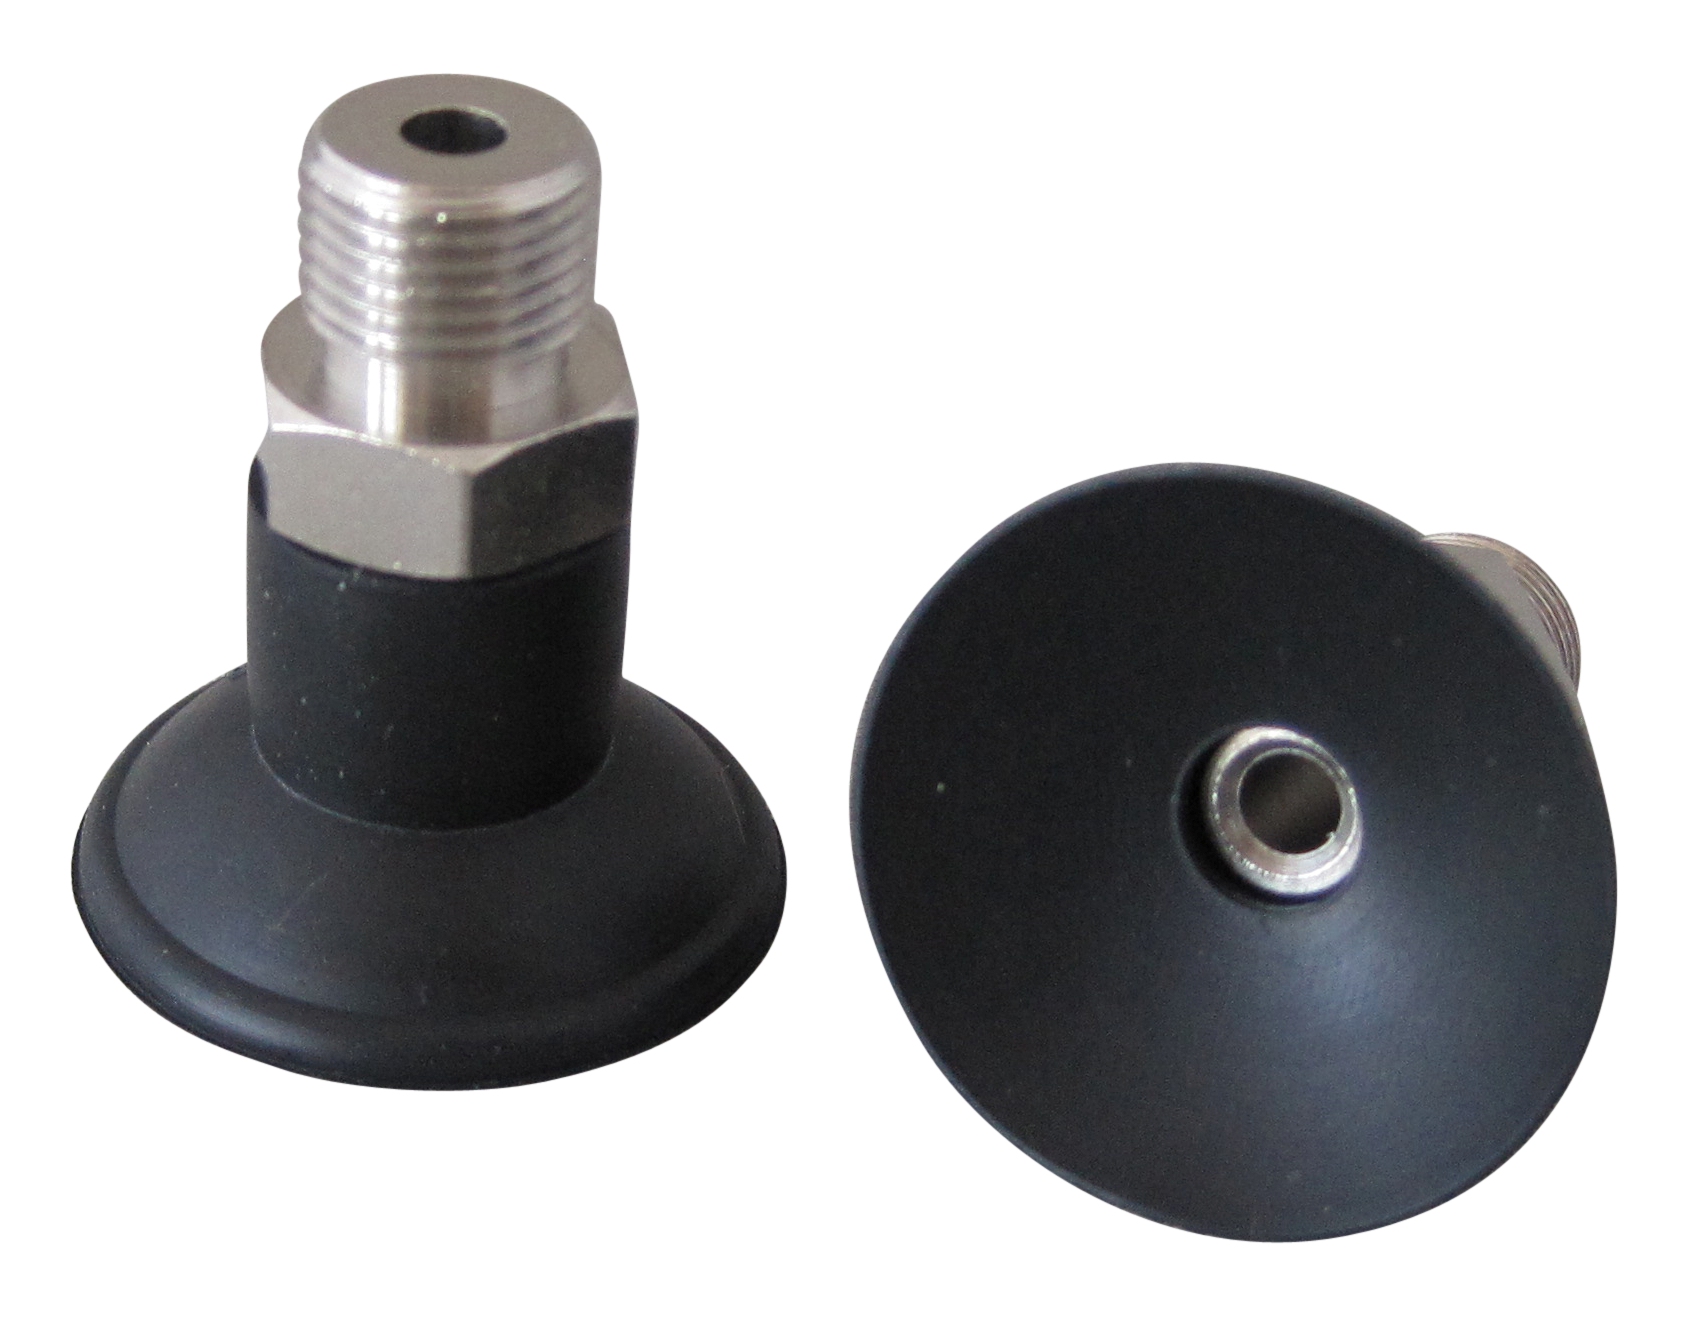 VacMotion USA product: 082515A - 25mm flat NBR suction cup with G1/8 male  fitting